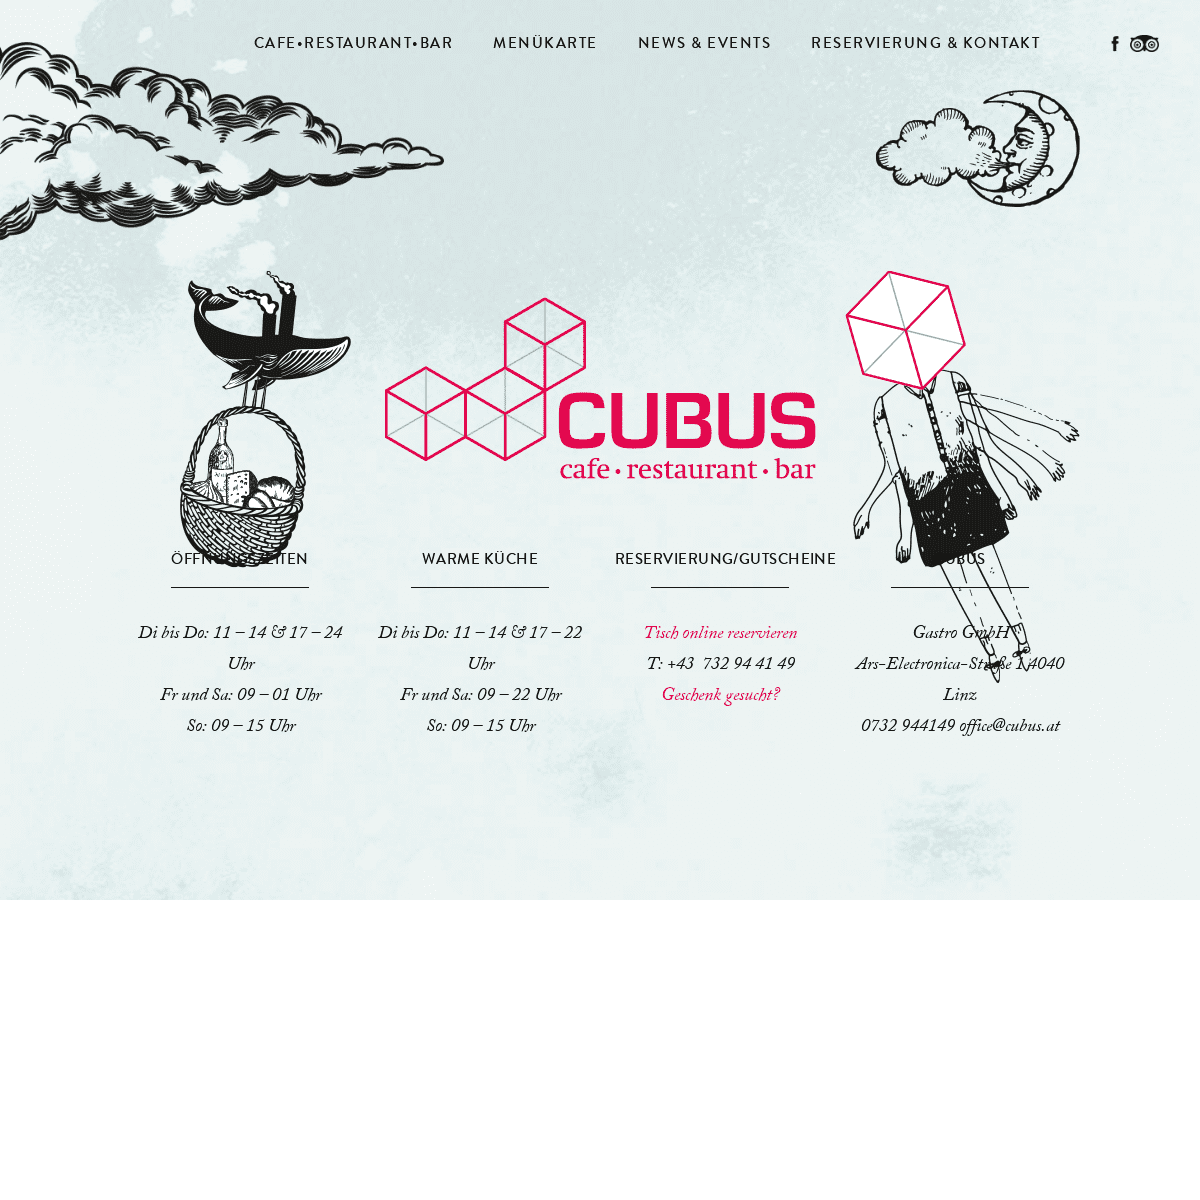 A complete backup of cubus.at